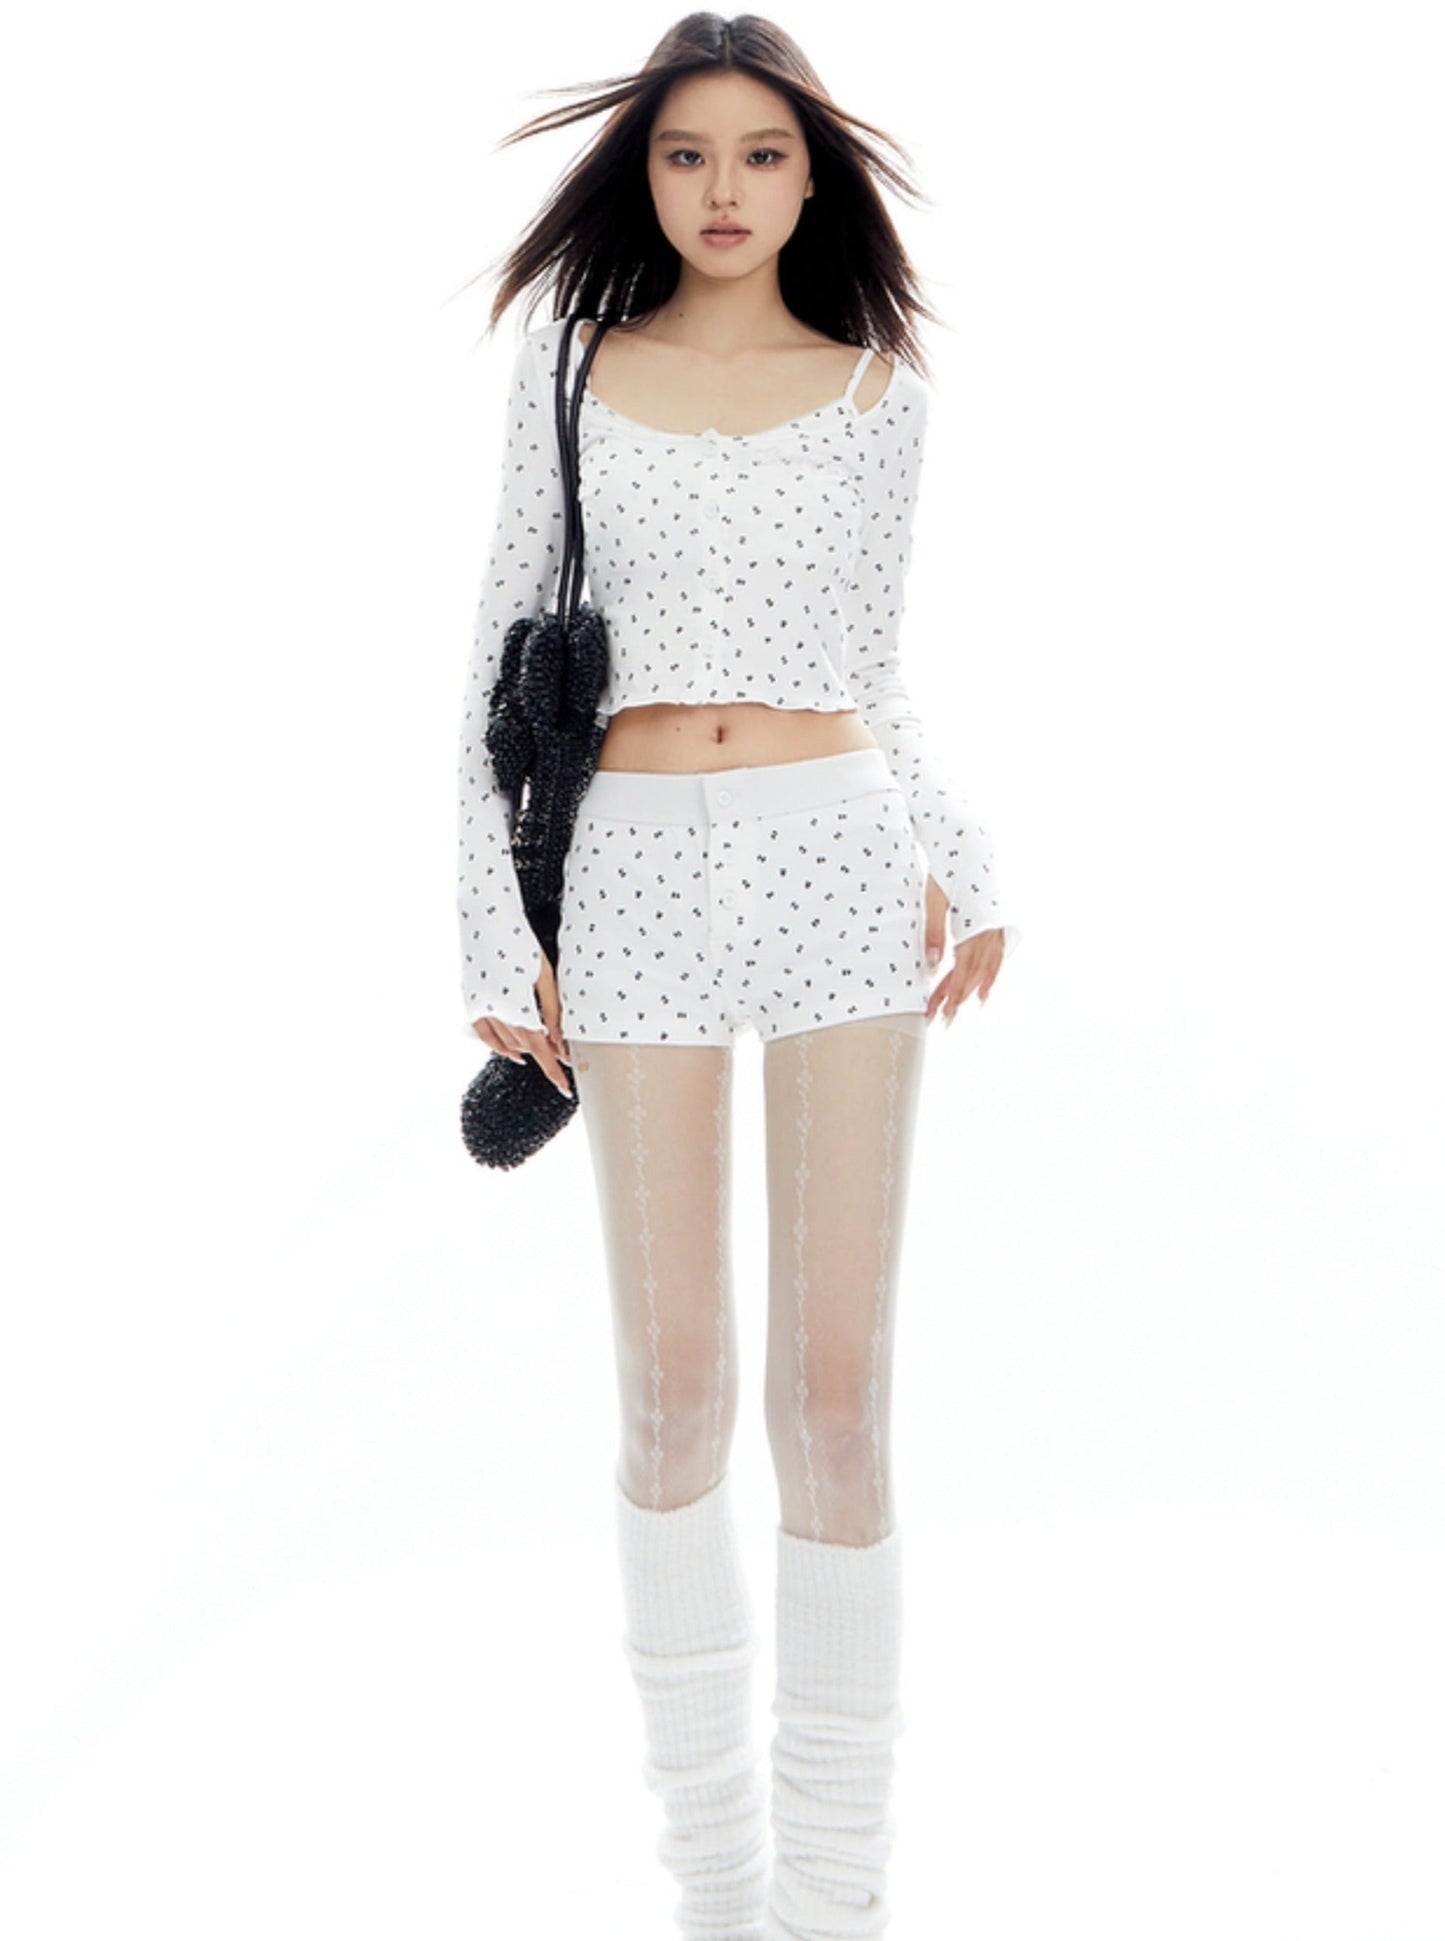 Knit Cardigan and Lace Camisole Hot Pants Set